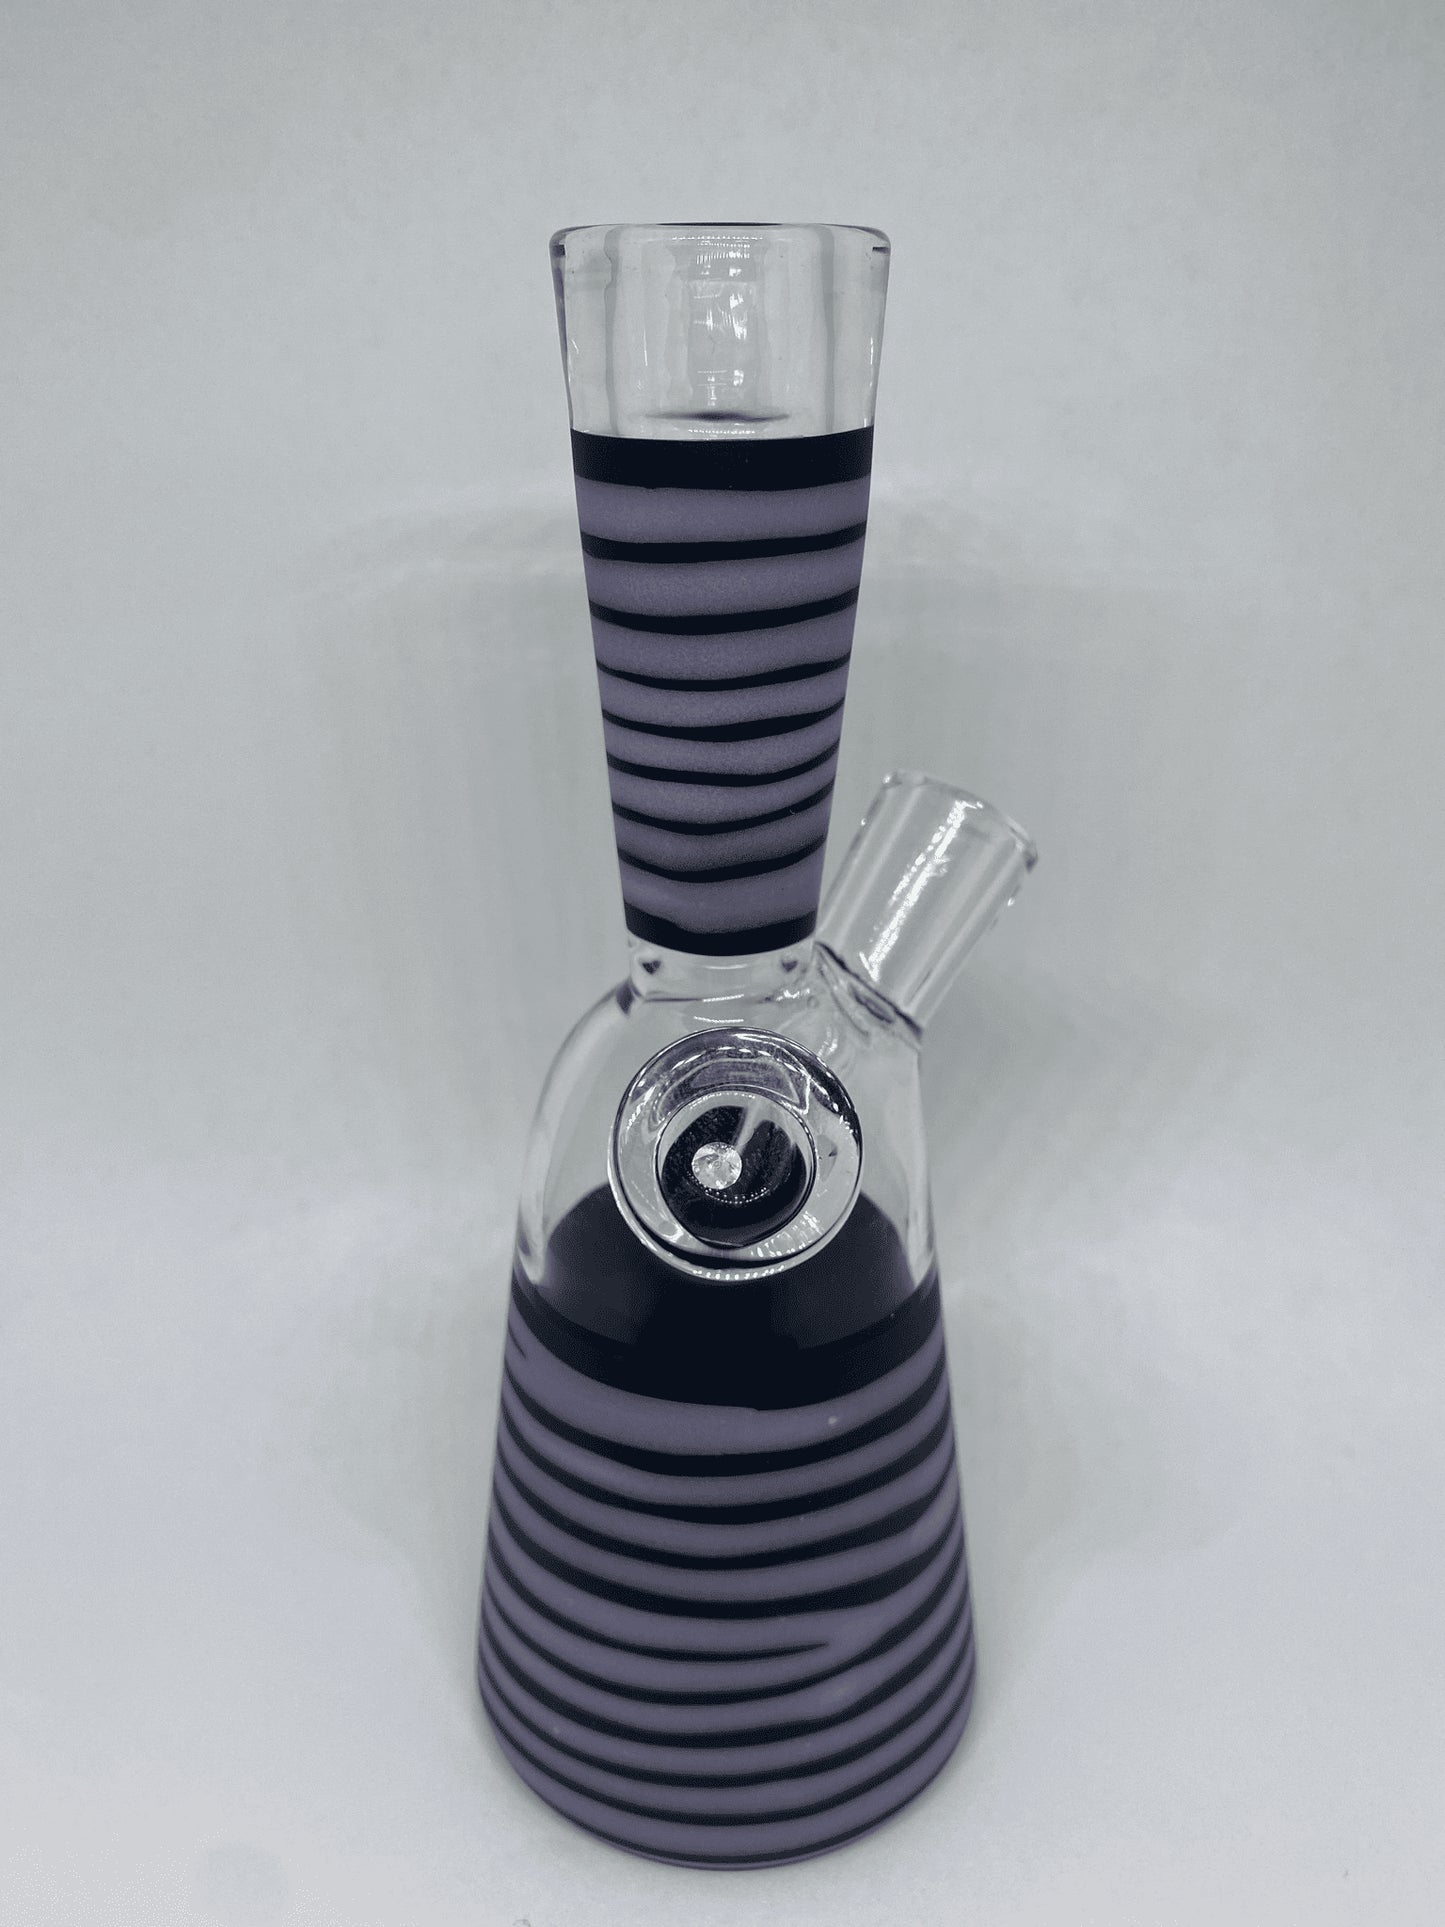 artisan-crafted art piece - Lavender Diamond Series Zoo Tube (A) by Robertson Glass (2021)